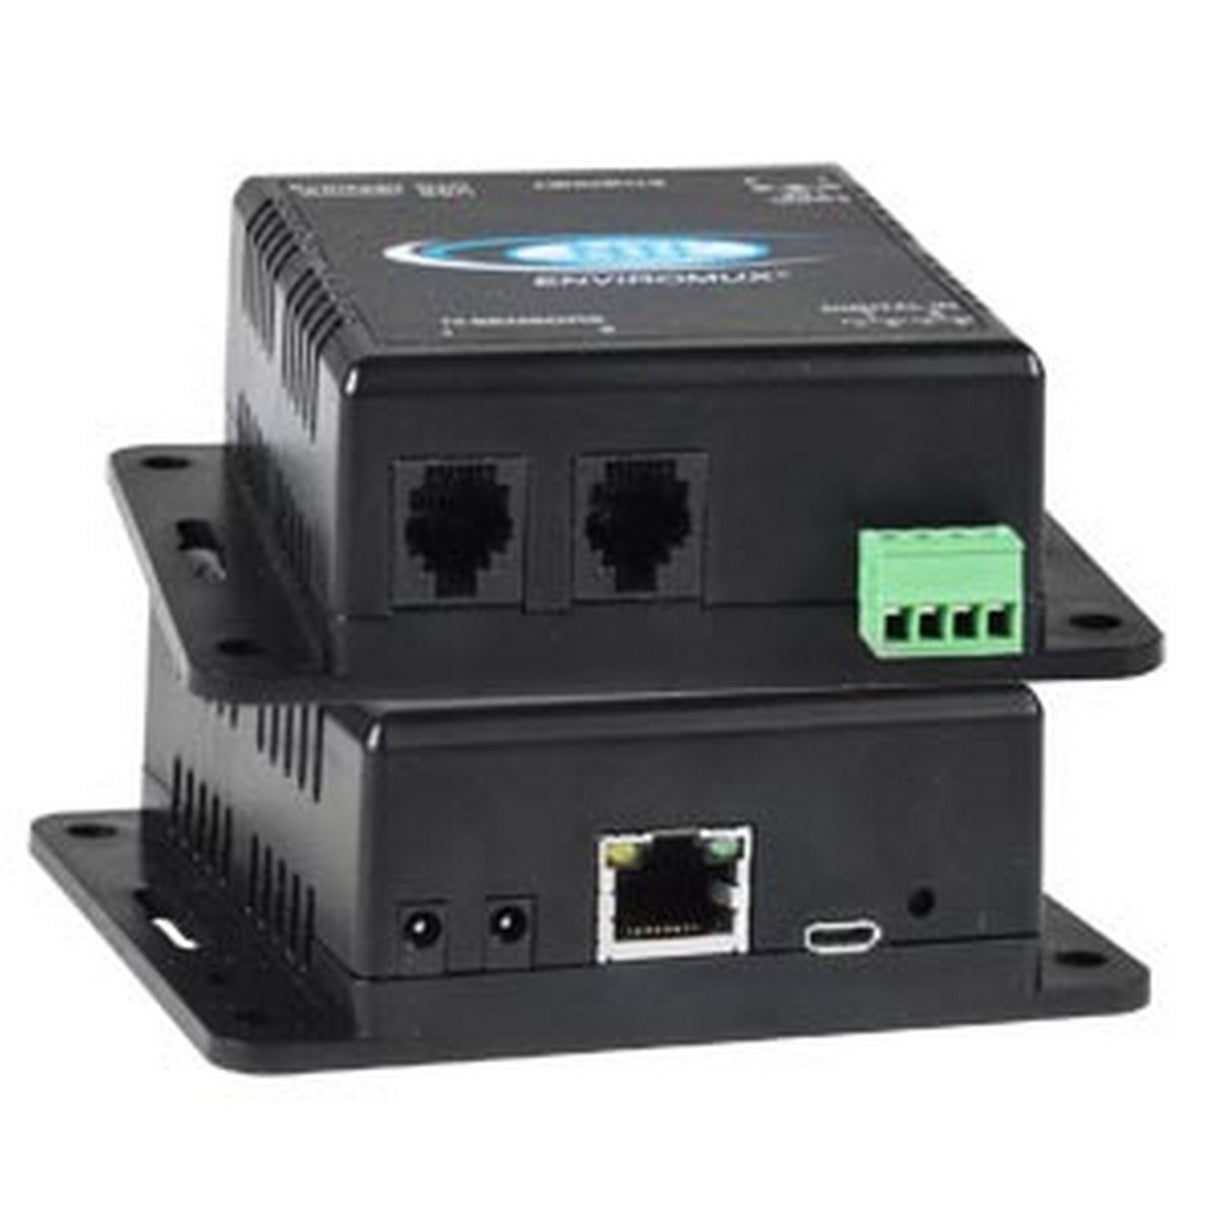 NTI E-1W ENVIROMUX Environment Monitoring System with 1-Wire Sensor Interface, 1 Power Supply Included